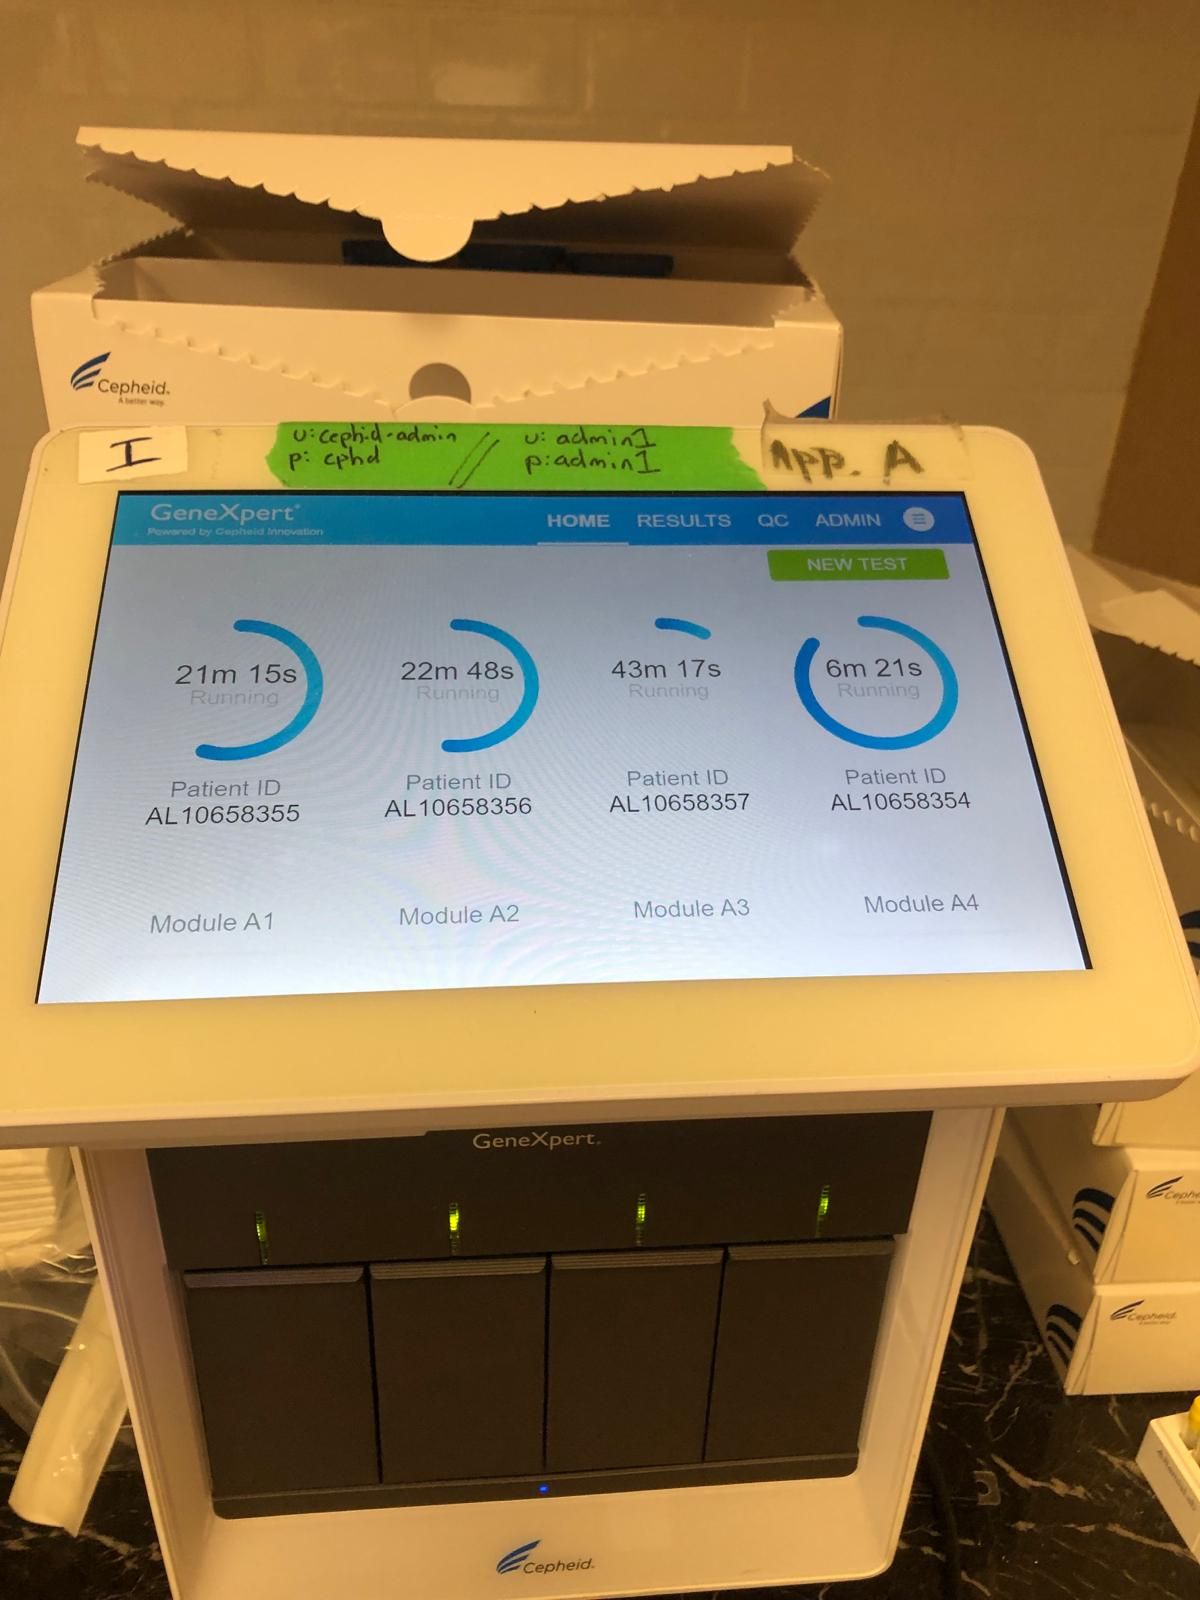 Cepheid GeneXpert Xpress IV-4 Module Molecular Diagnostic System Excellent COVID/FLU/RSV/Strep/MVP  RT-PCR TESTING MACHINE FOR SALE OR LEASE. ALSO moderate system available that runs tuberculosis TB (MTB/RIF)